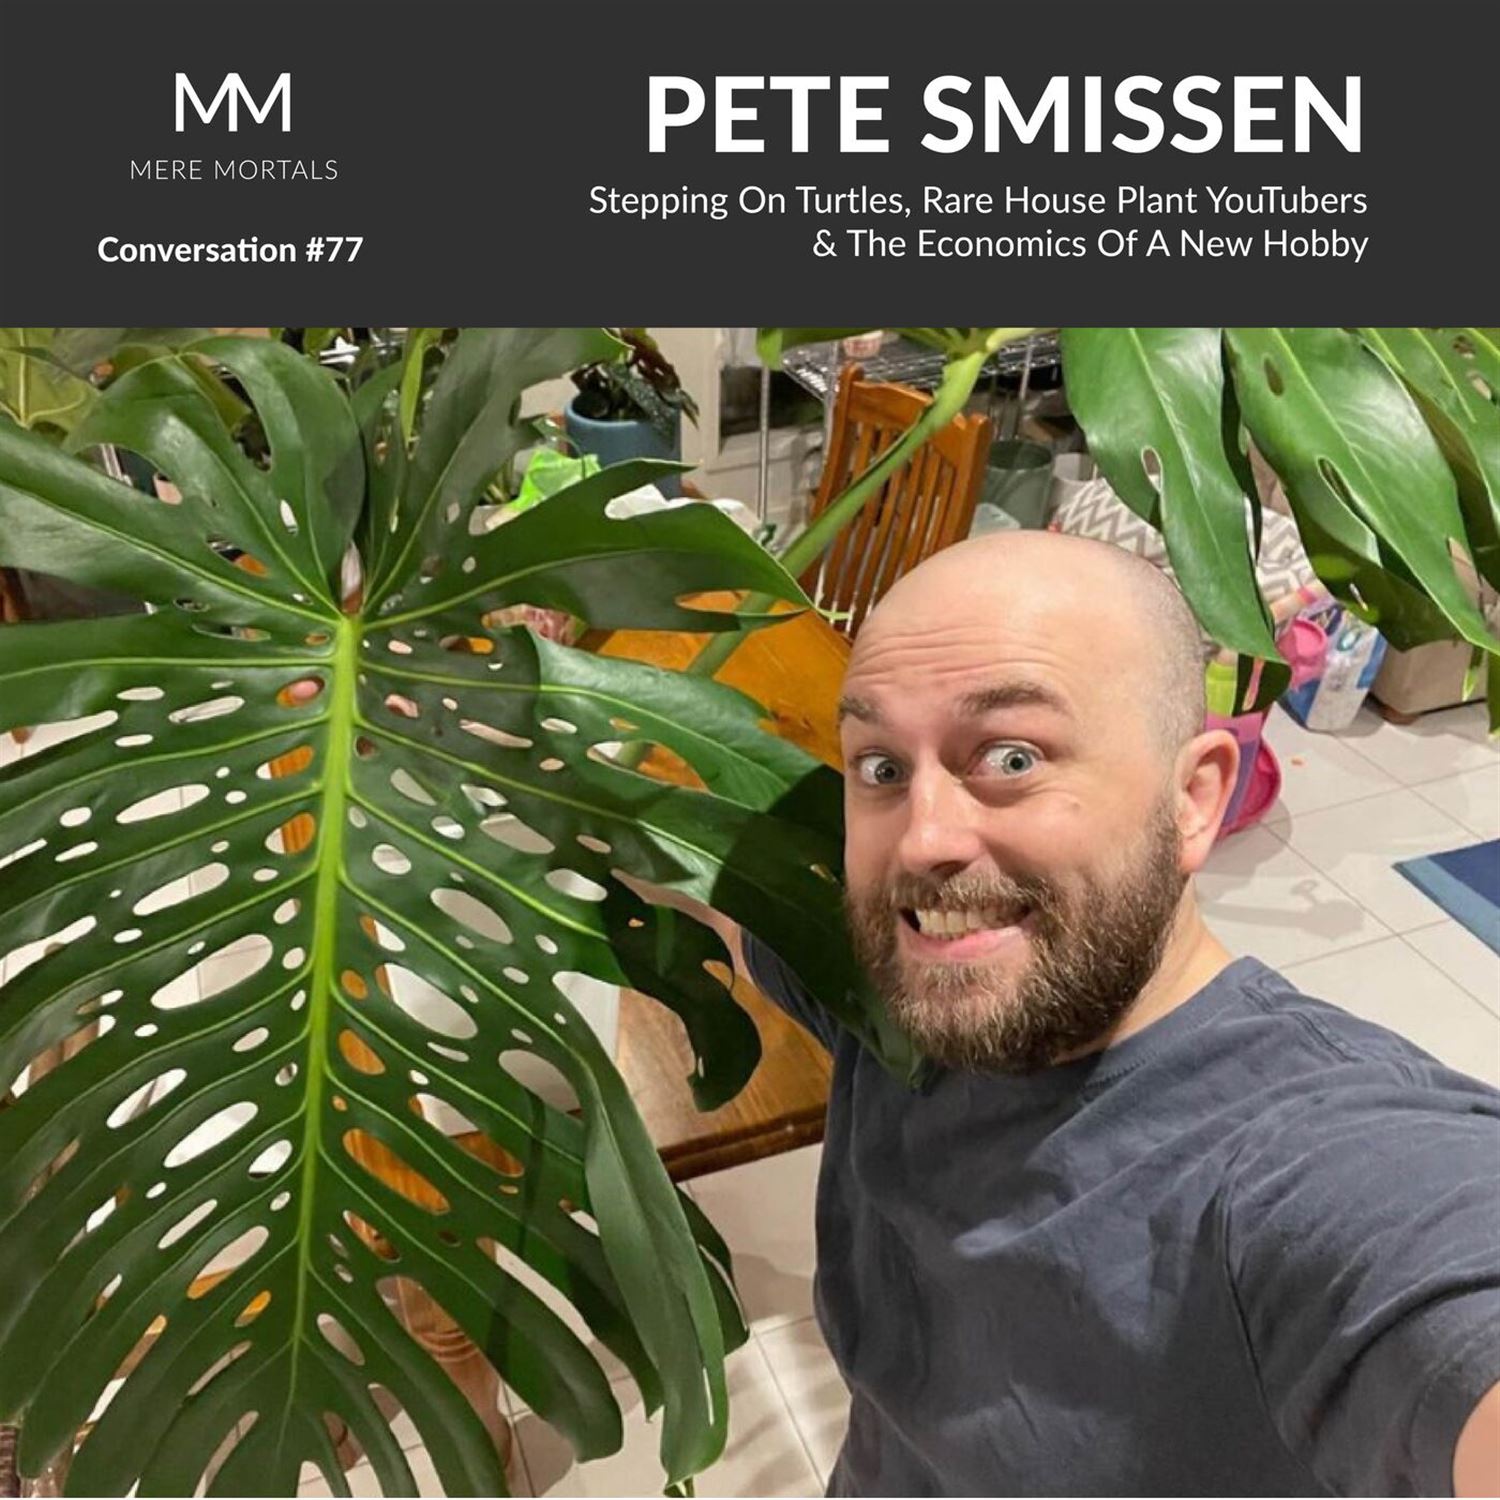 PETE SMISSEN | Stepping On Turtles, Rare House Plant YouTubers & The Economics Of A New Hobby